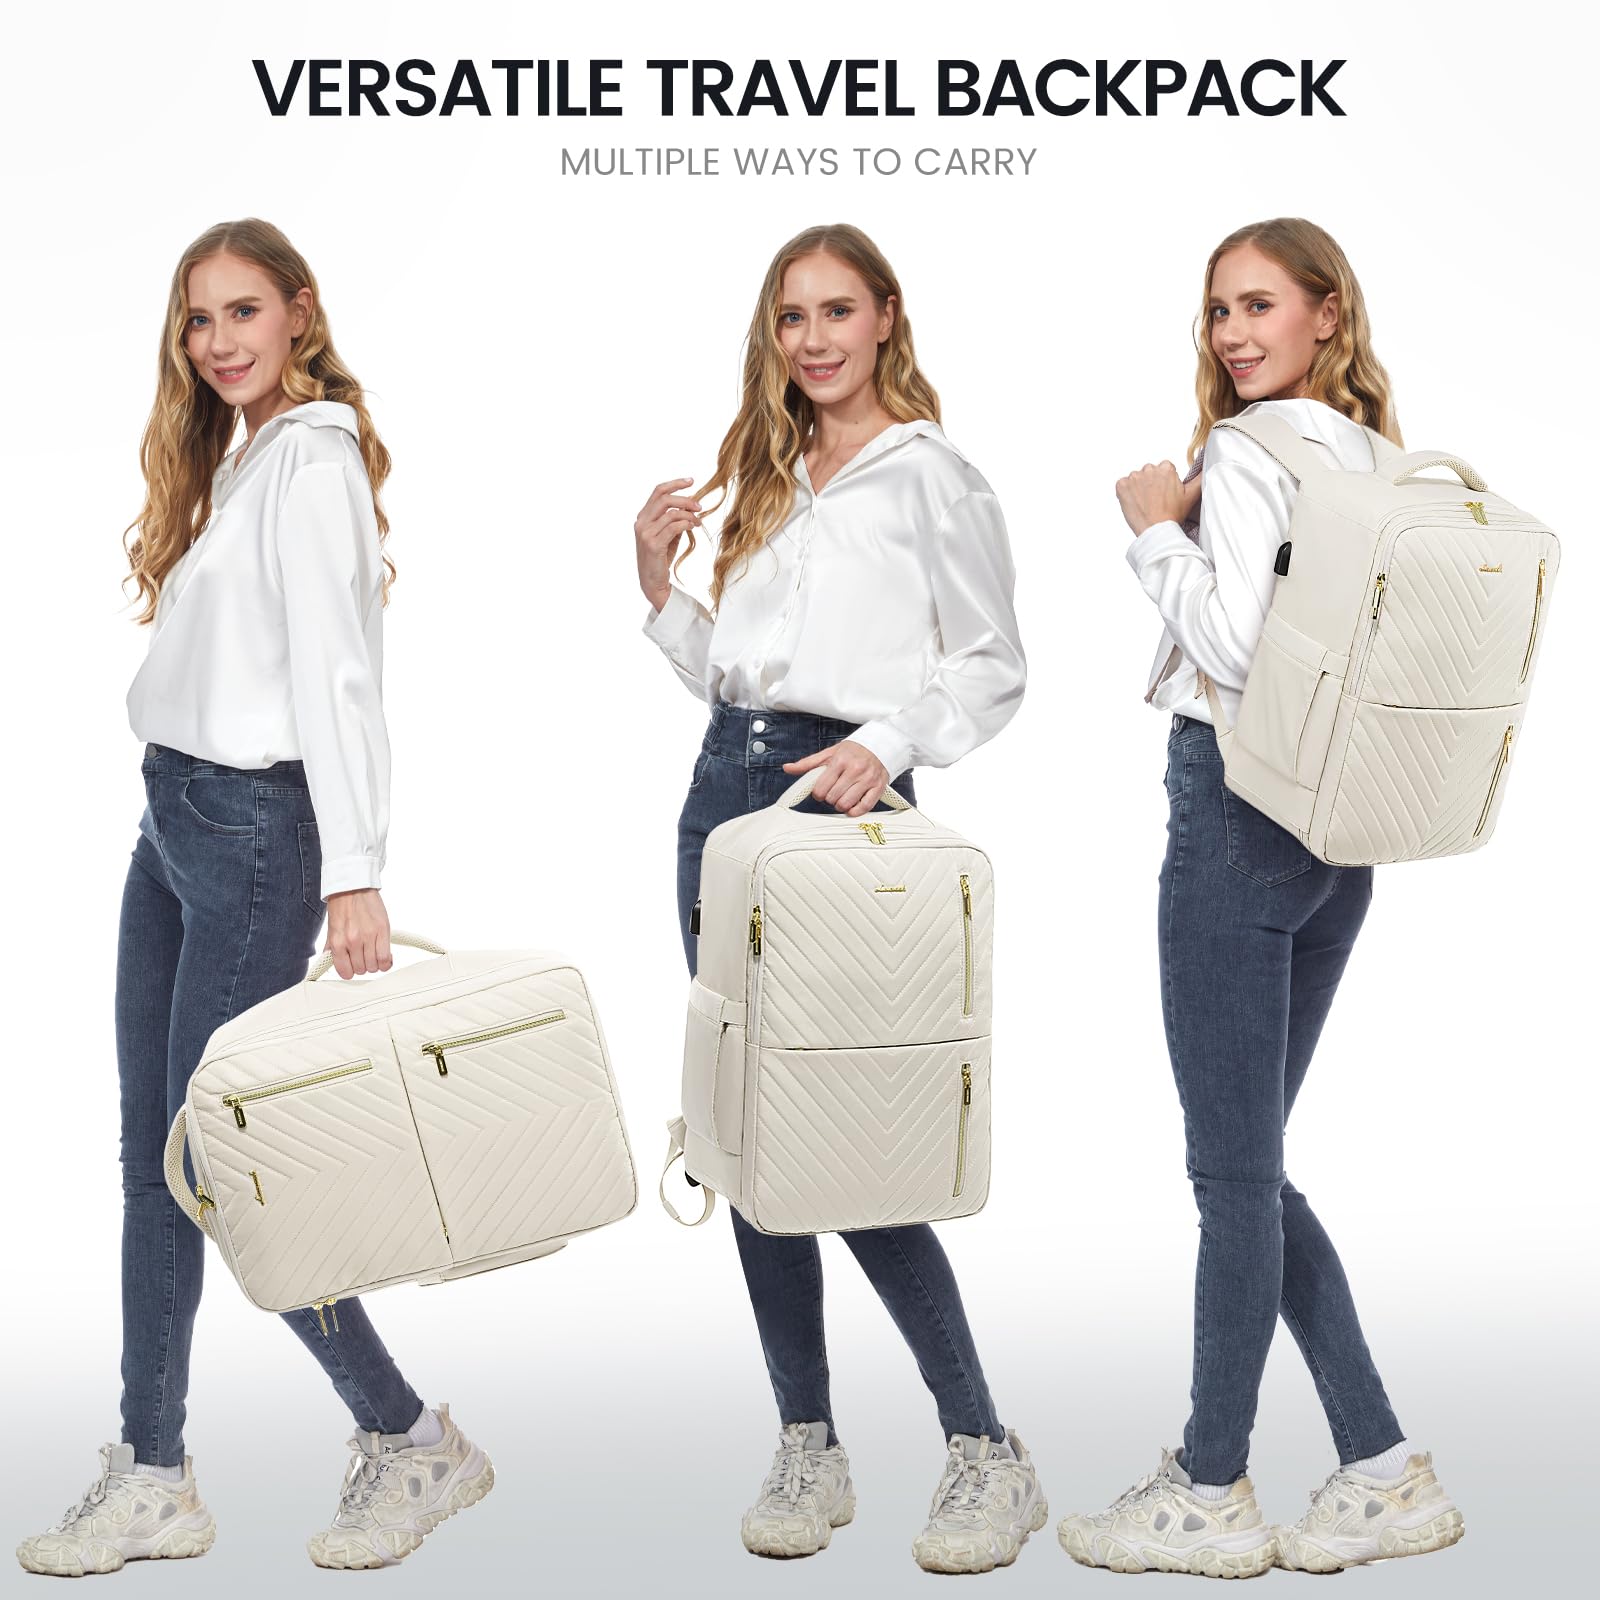 LOVEVOOK Carry On Backpack for Women Personal Item Bag Laptop Bag with USB Port, Fashion Waterproof Backpacks Stylish Travel Bags Vintage Daypacks for Work